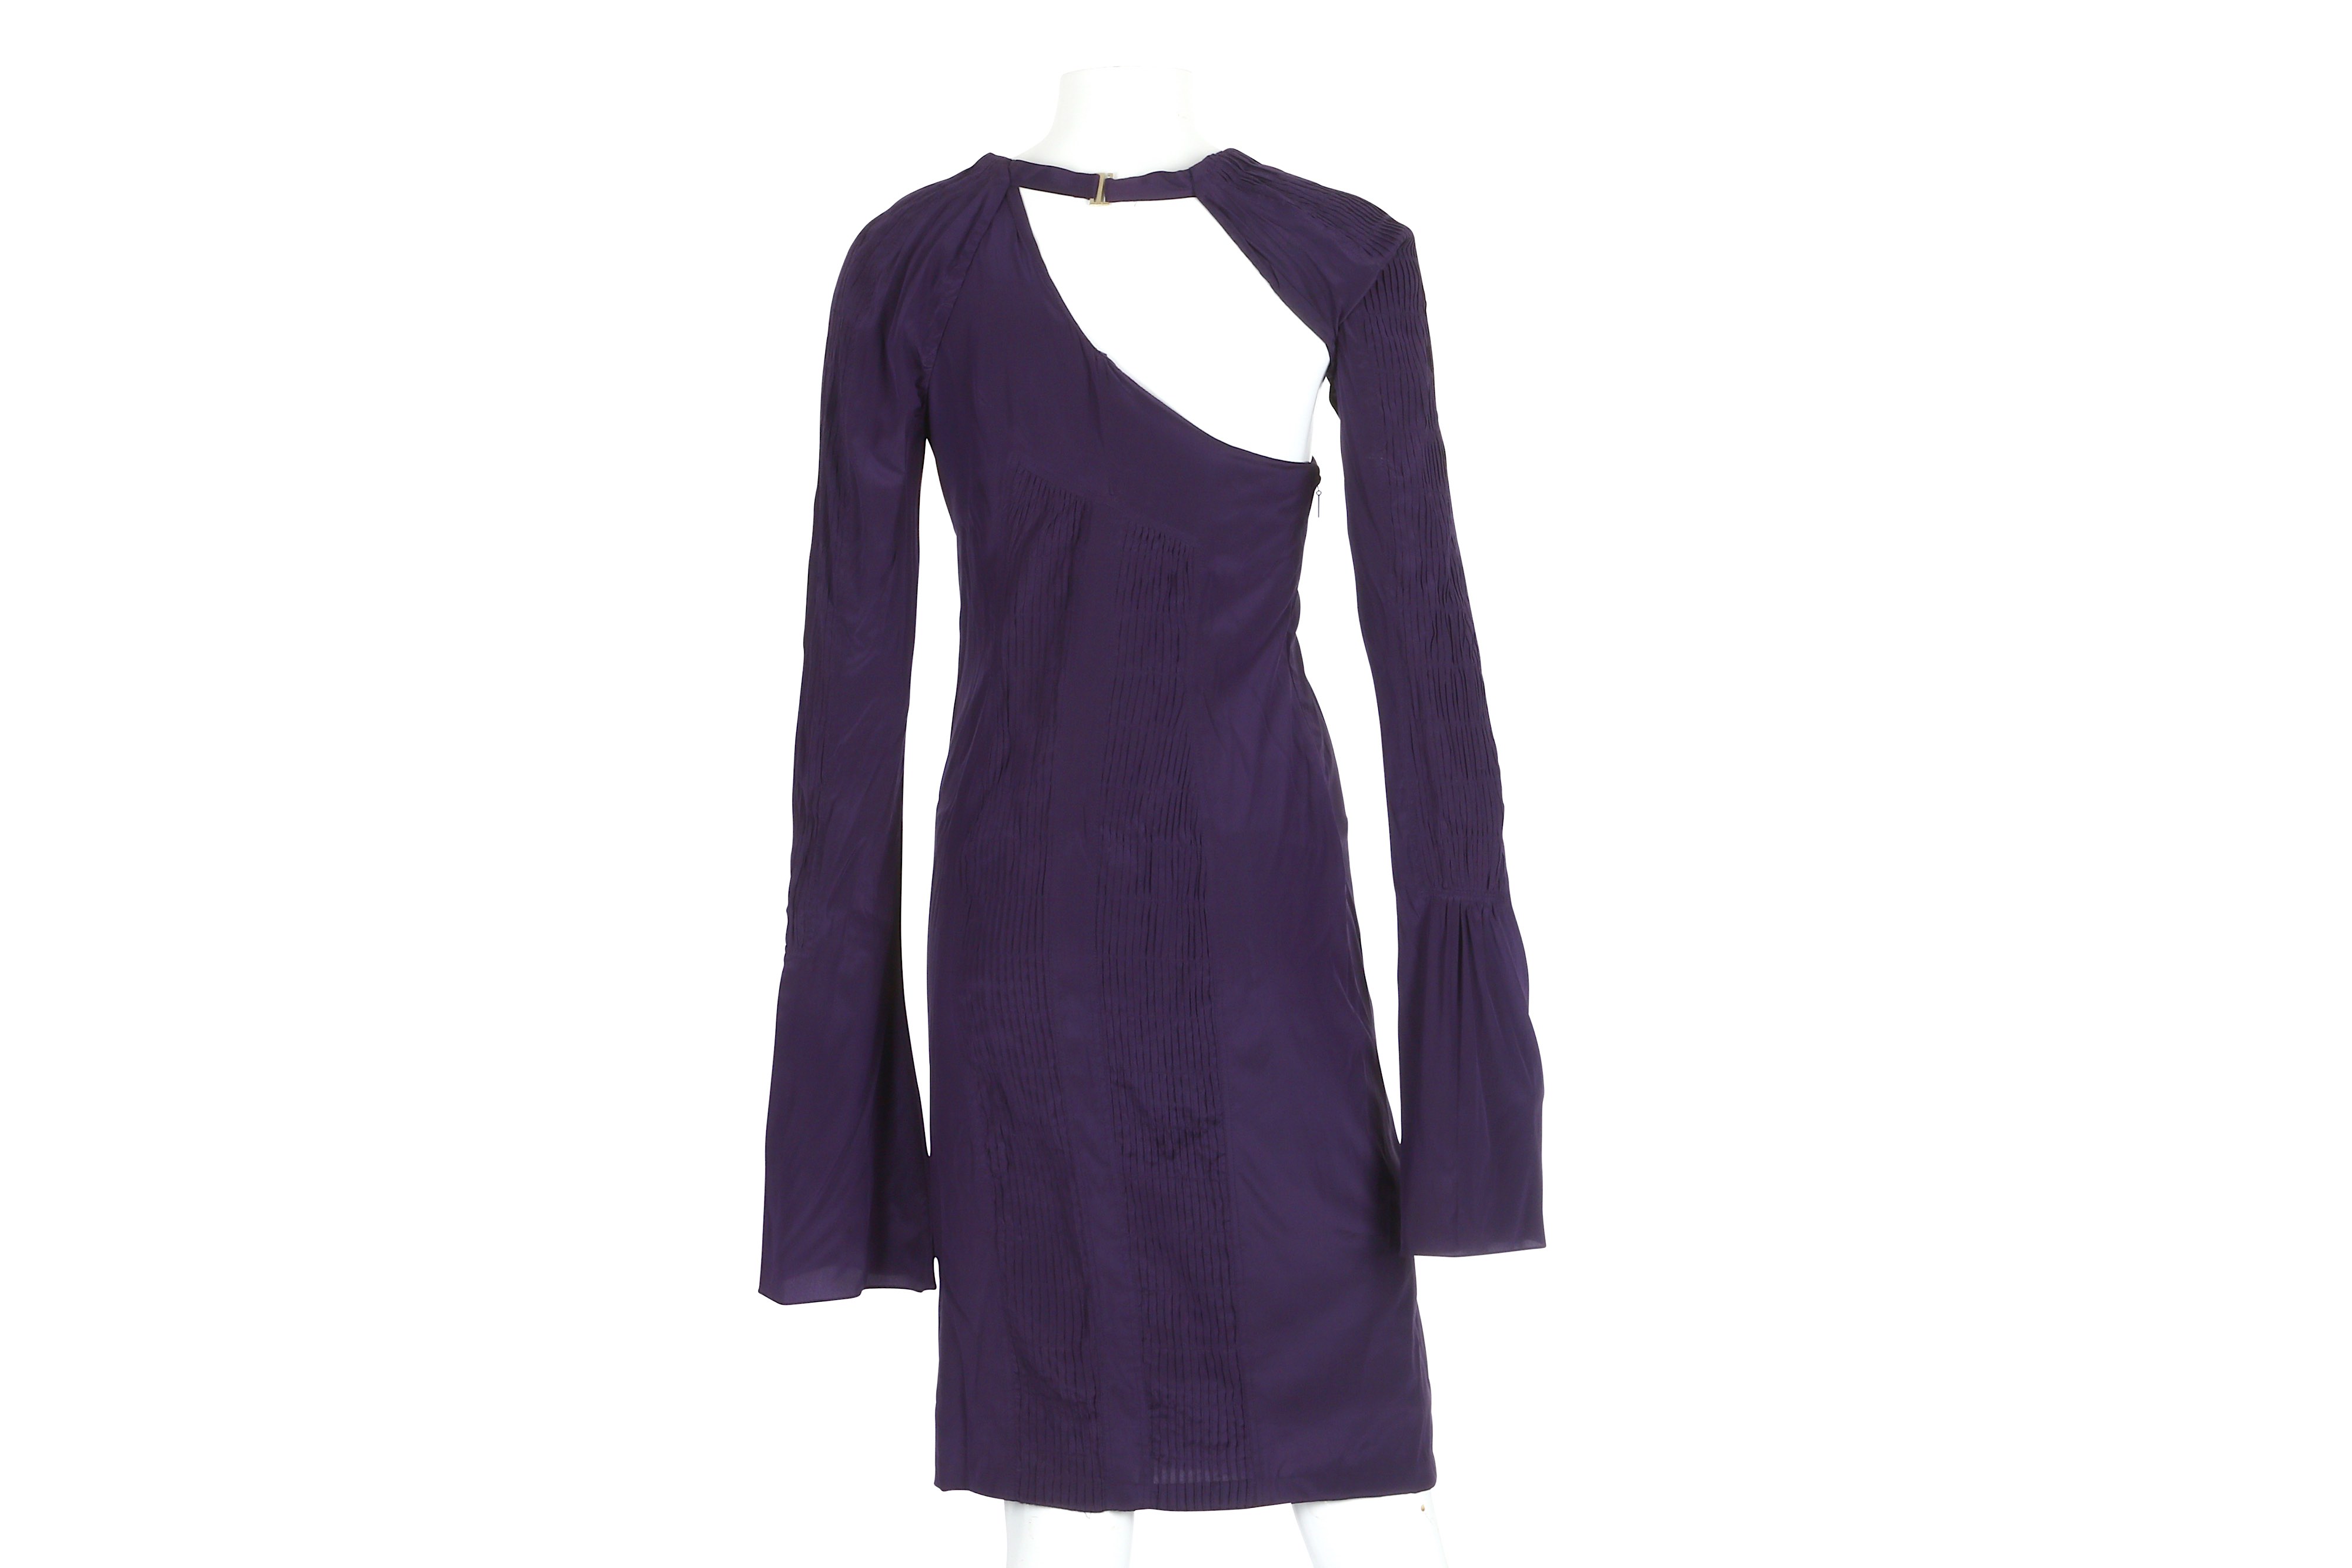 Tom Ford for Gucci Purple Silk Dress - size 40 - Image 5 of 7